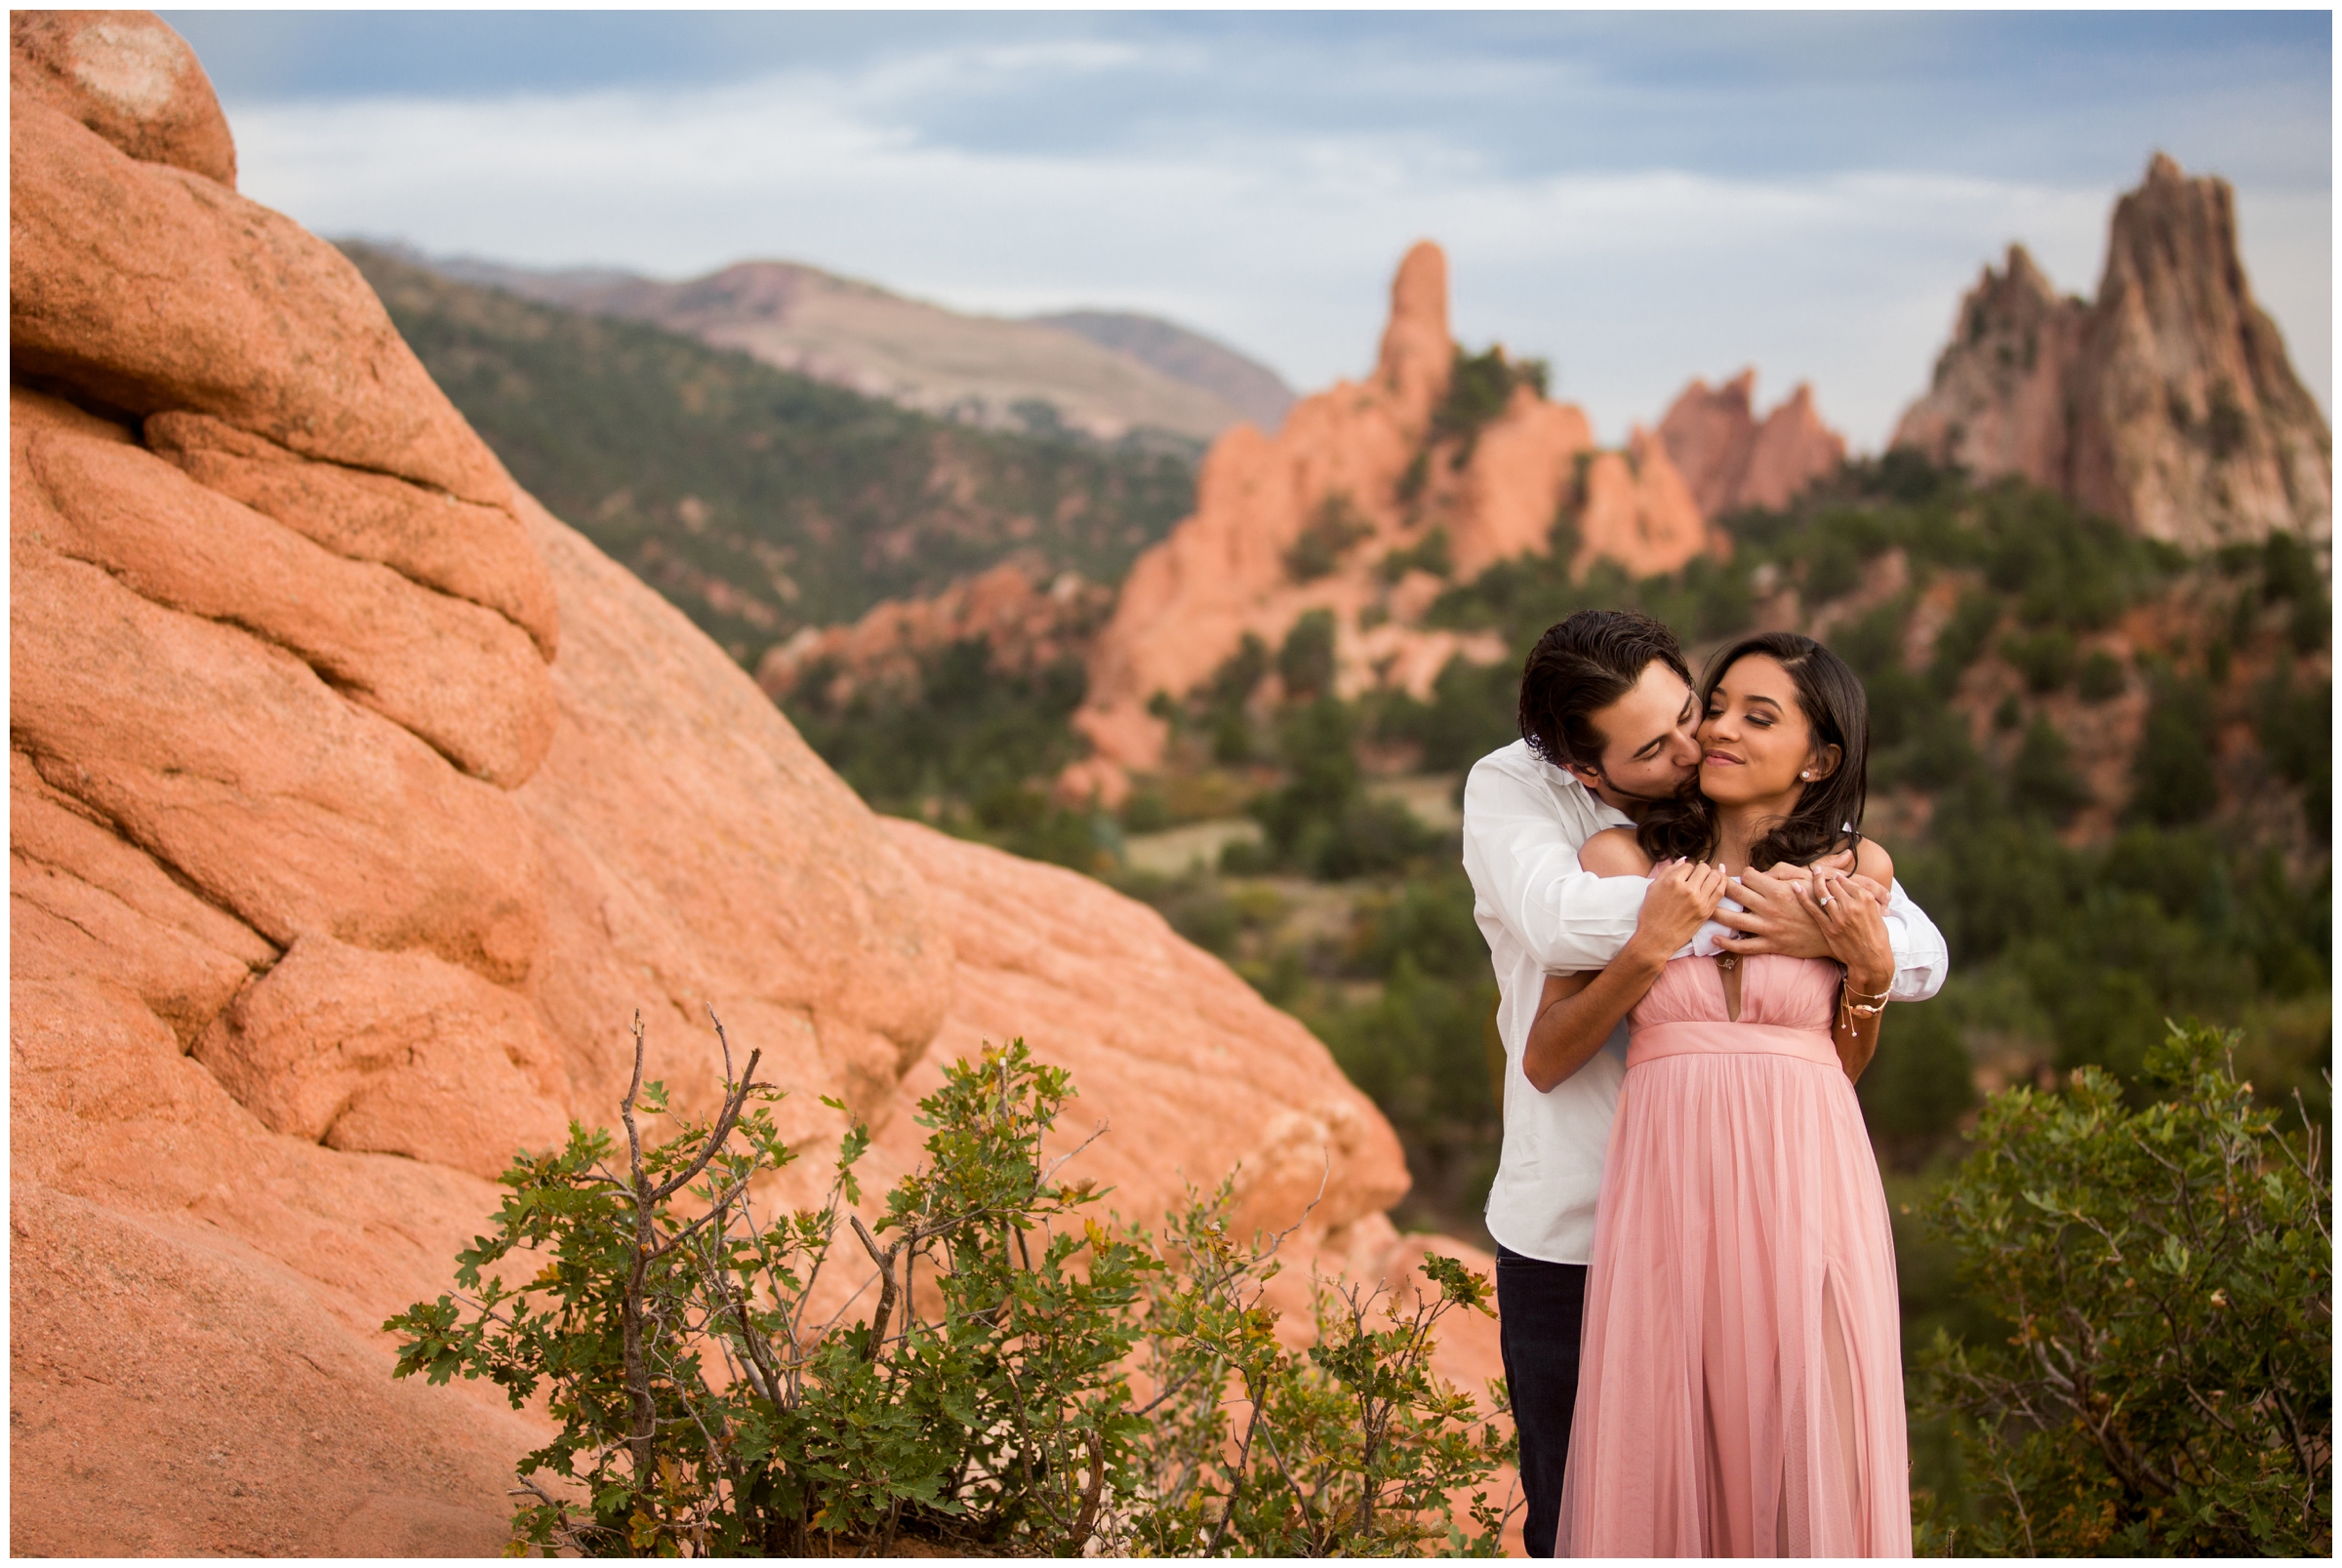 High Point Overlook Garden of the Gods engagement photos by Colorado Springs portrait photographer Plum Pretty Photography